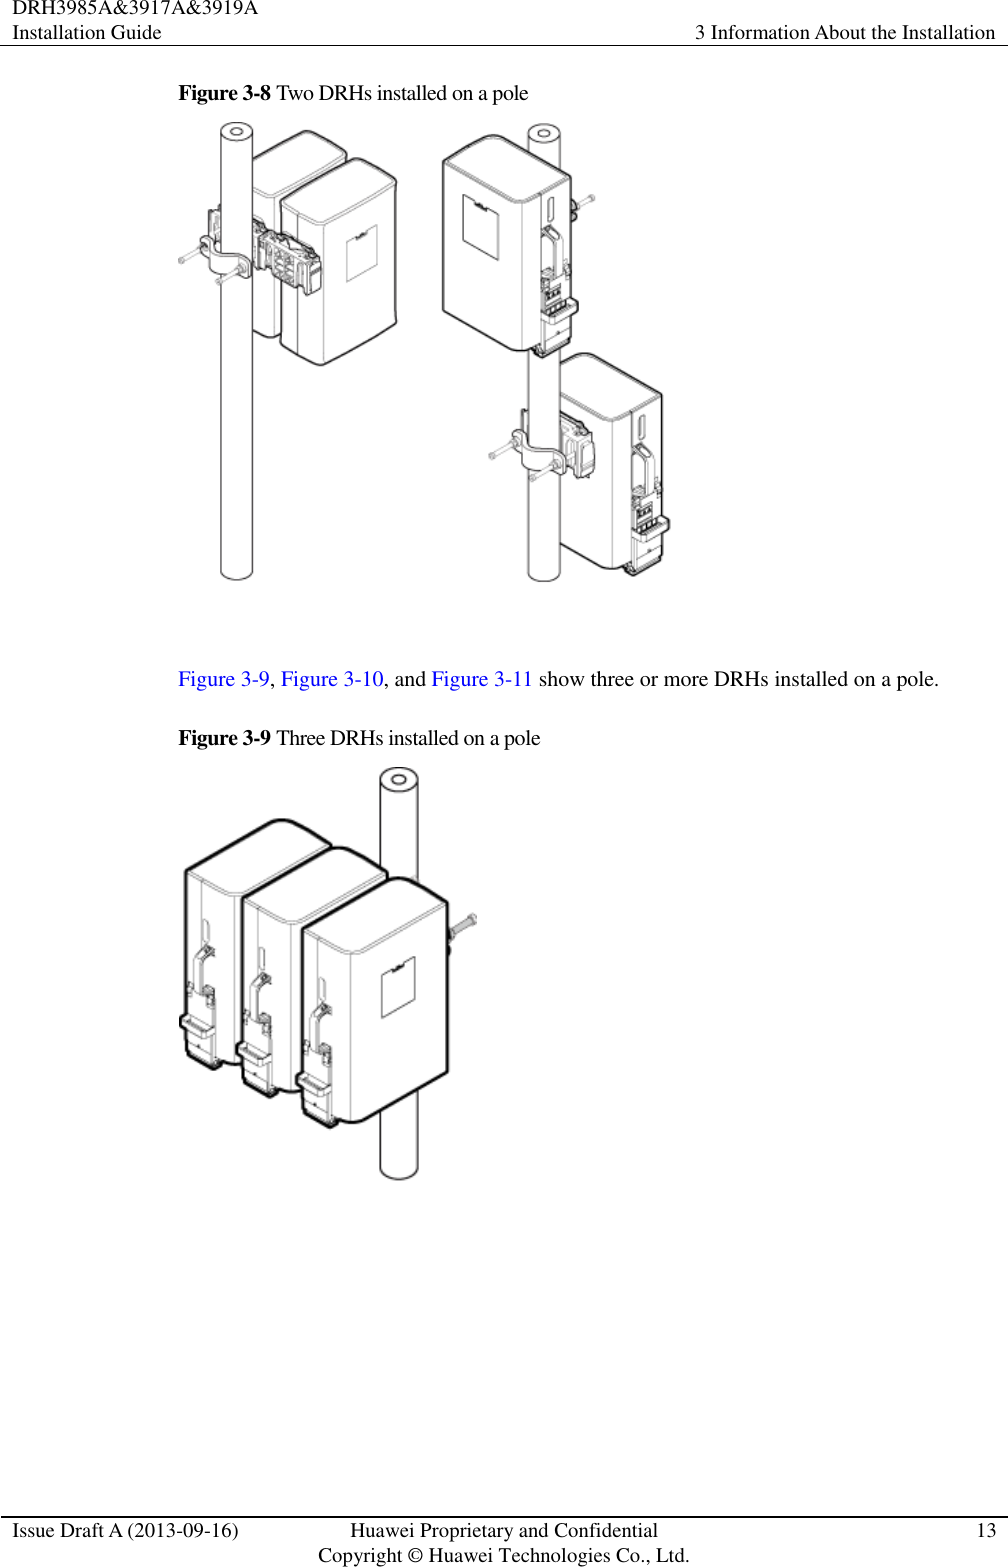 DRH3985A&amp;3917A&amp;3919A Installation Guide 3 Information About the Installation  Issue Draft A (2013-09-16) Huawei Proprietary and Confidential                                     Copyright © Huawei Technologies Co., Ltd. 13  Figure 3-8 Two DRHs installed on a pole   Figure 3-9, Figure 3-10, and Figure 3-11 show three or more DRHs installed on a pole. Figure 3-9 Three DRHs installed on a pole   